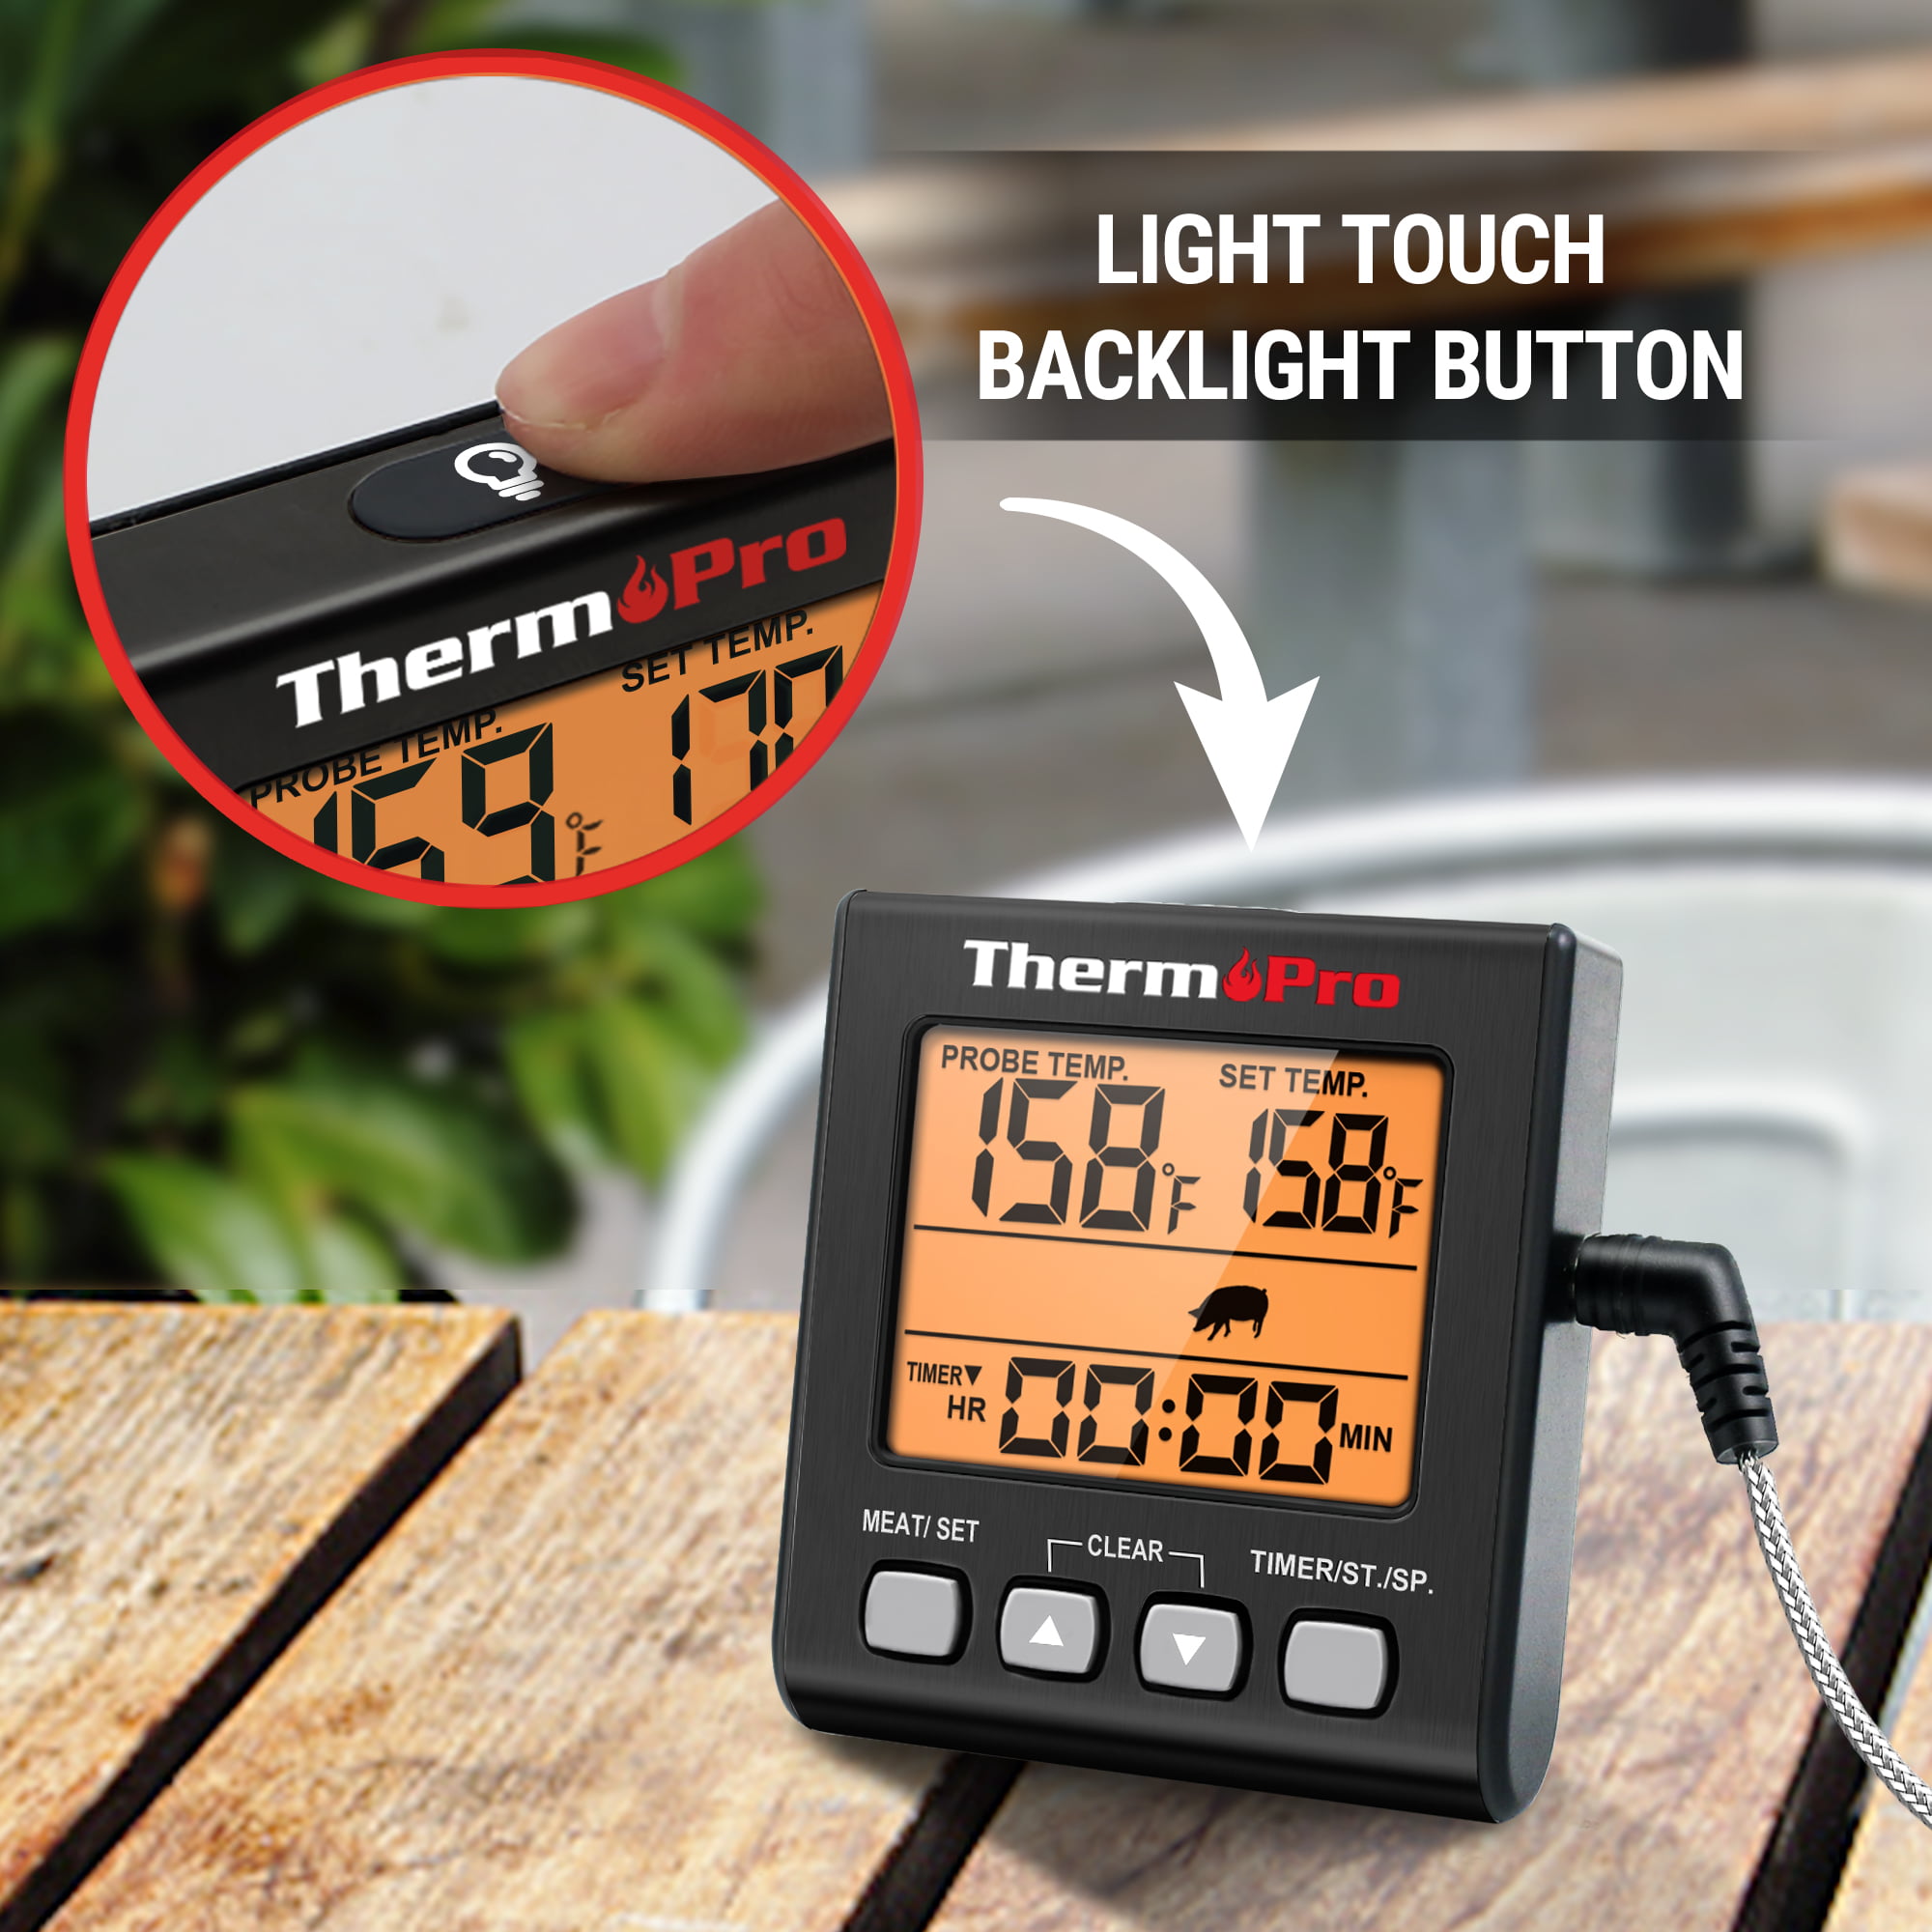 ThermoPro TP16 Digital Stainless Steel Cooking Thermometer for Smoker Oven  Kitchen BBQ Grill Clock Timer with Temperature Probe TP-16 - The Home Depot